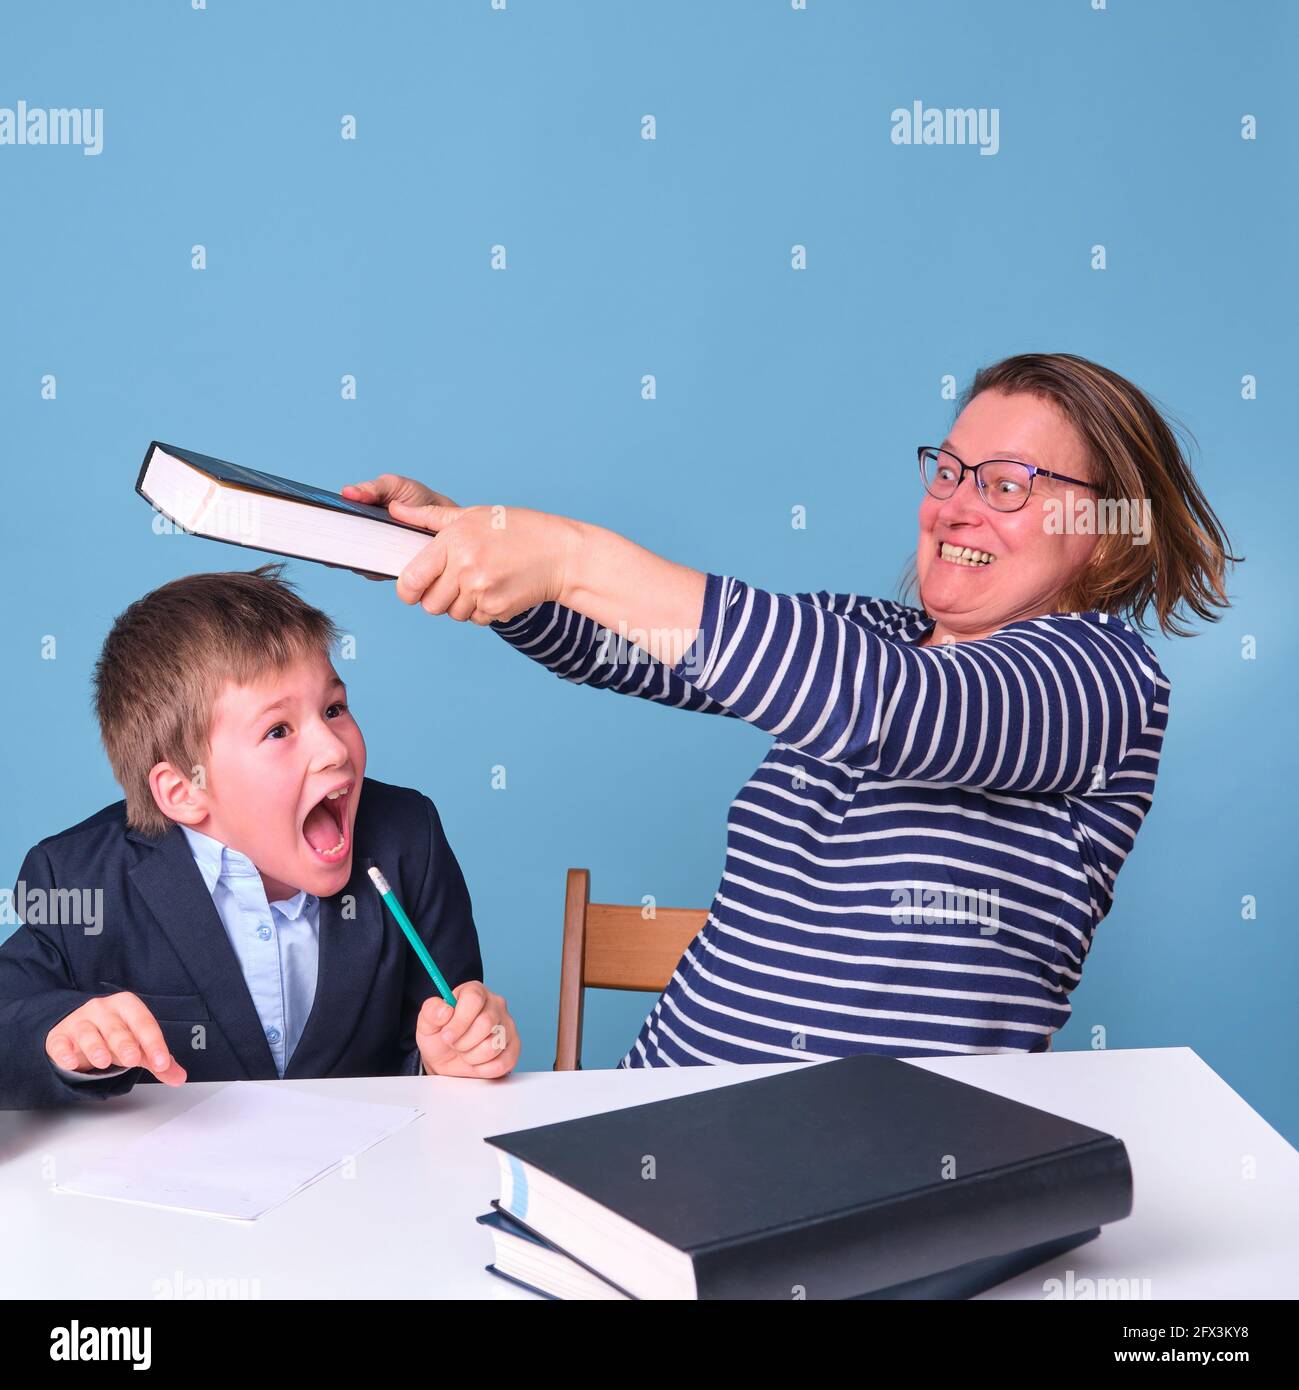 https://c8.alamy.com/comp/2FX3KY8/angry-mom-hits-schoolboy-boy-at-school-desk-with-book-blue-background-2FX3KY8.jpg